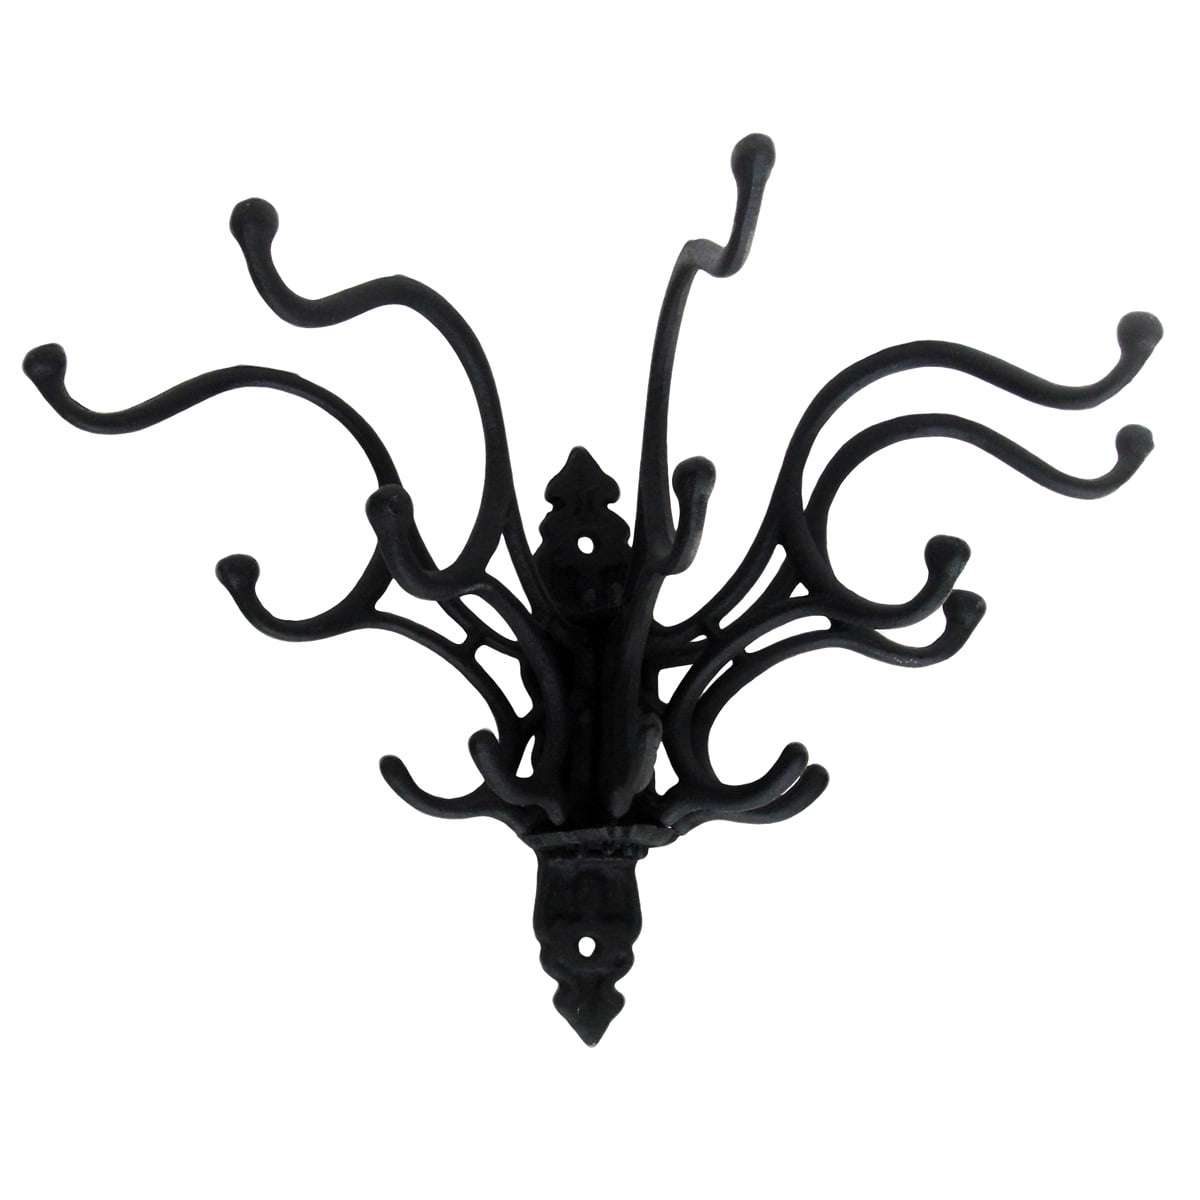 Hats or PLANTS 2 Cast Iron Victorian Style Hook ideal for Coats 